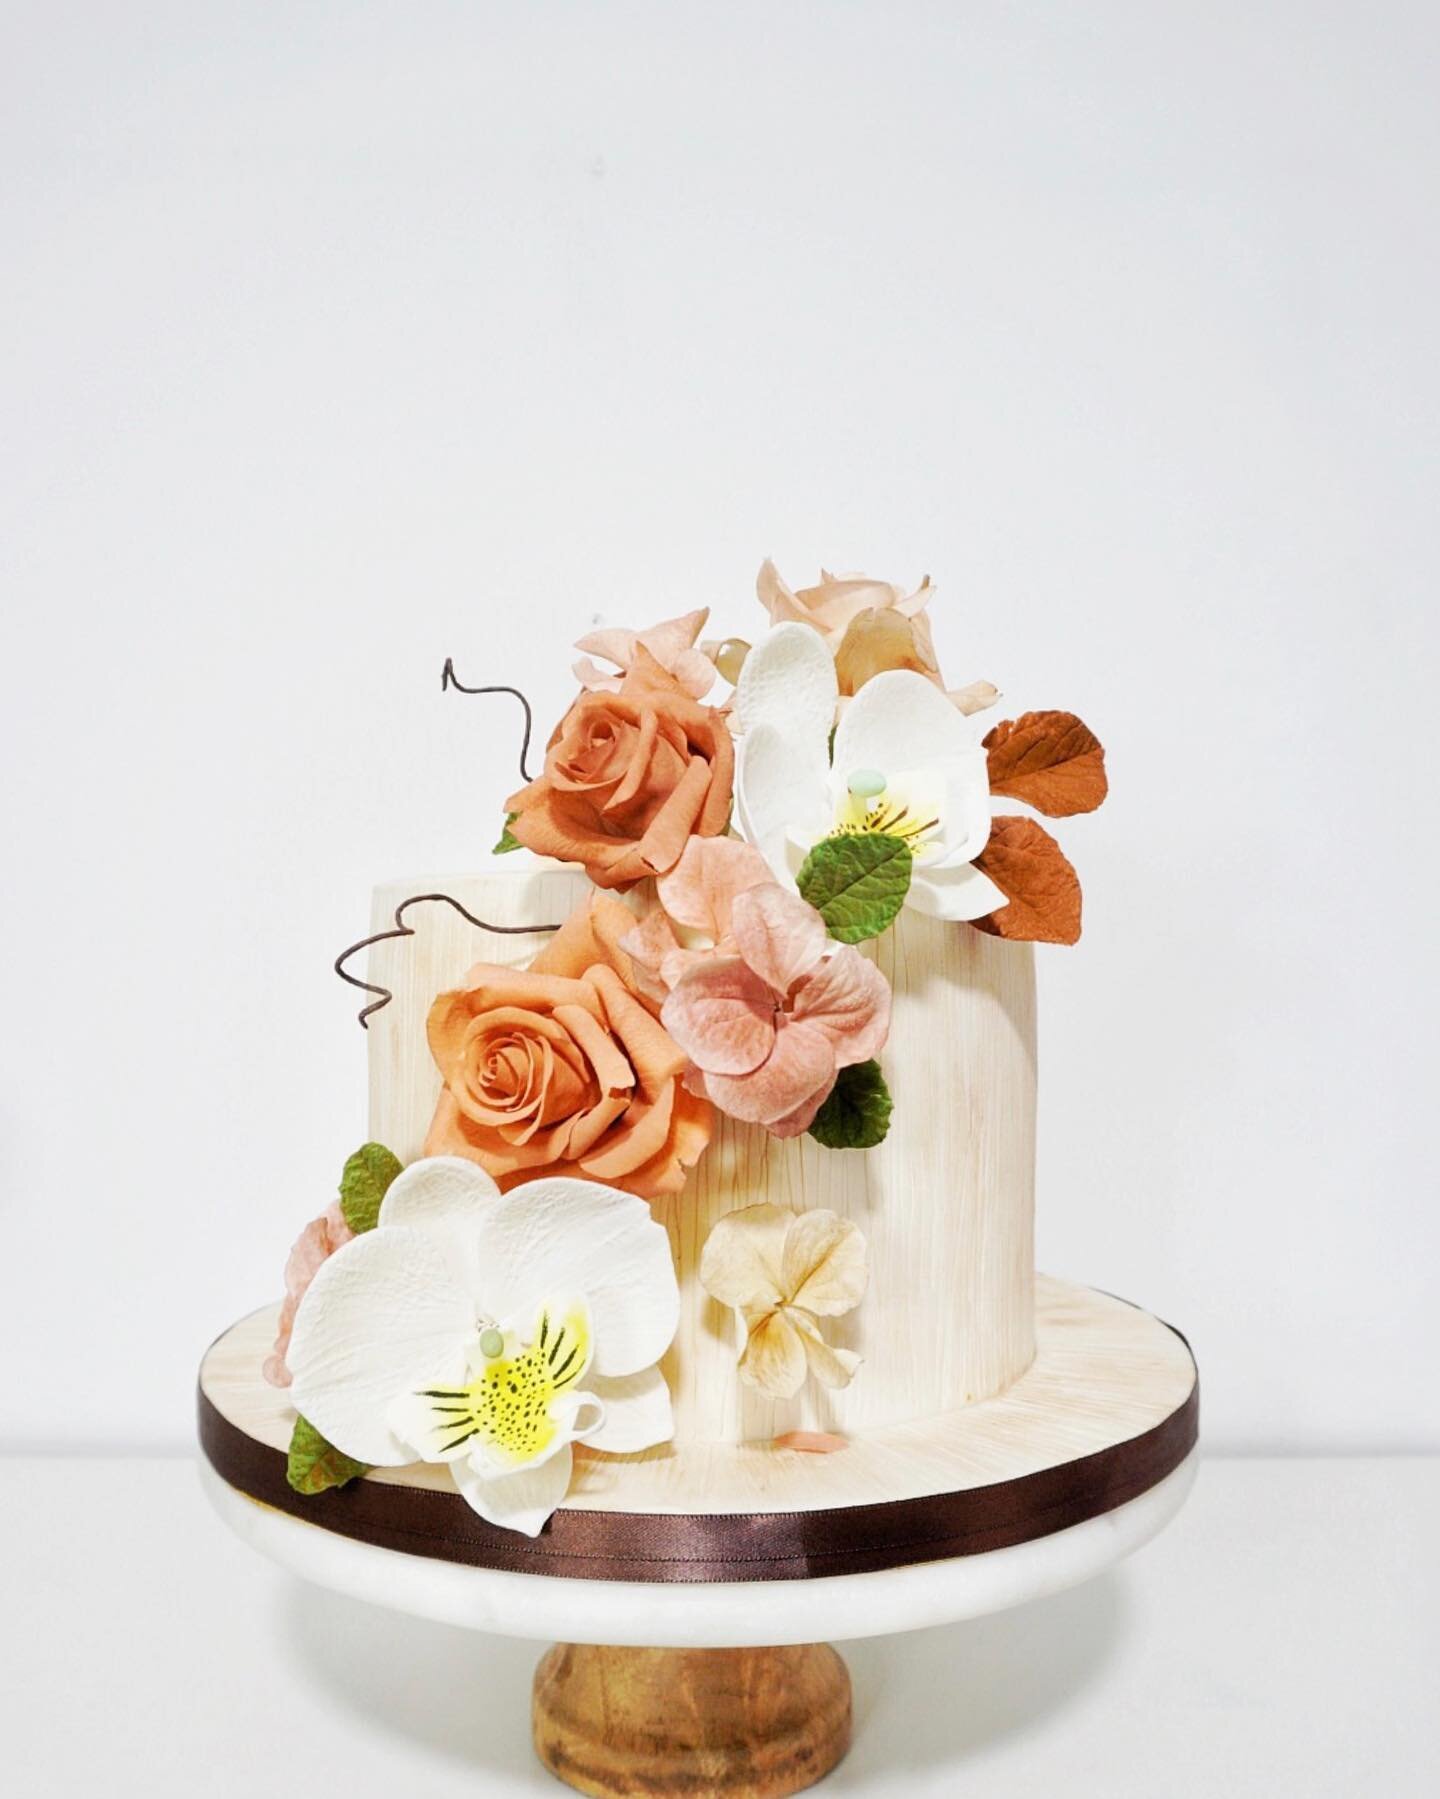 Inspired by autumn colours, this cake shows off a cascading arrangement of sugar flowers that never wilt and last a long time. Store your sugar flowers as your wedding keepsake! 🤎 #CakeVowWeddings